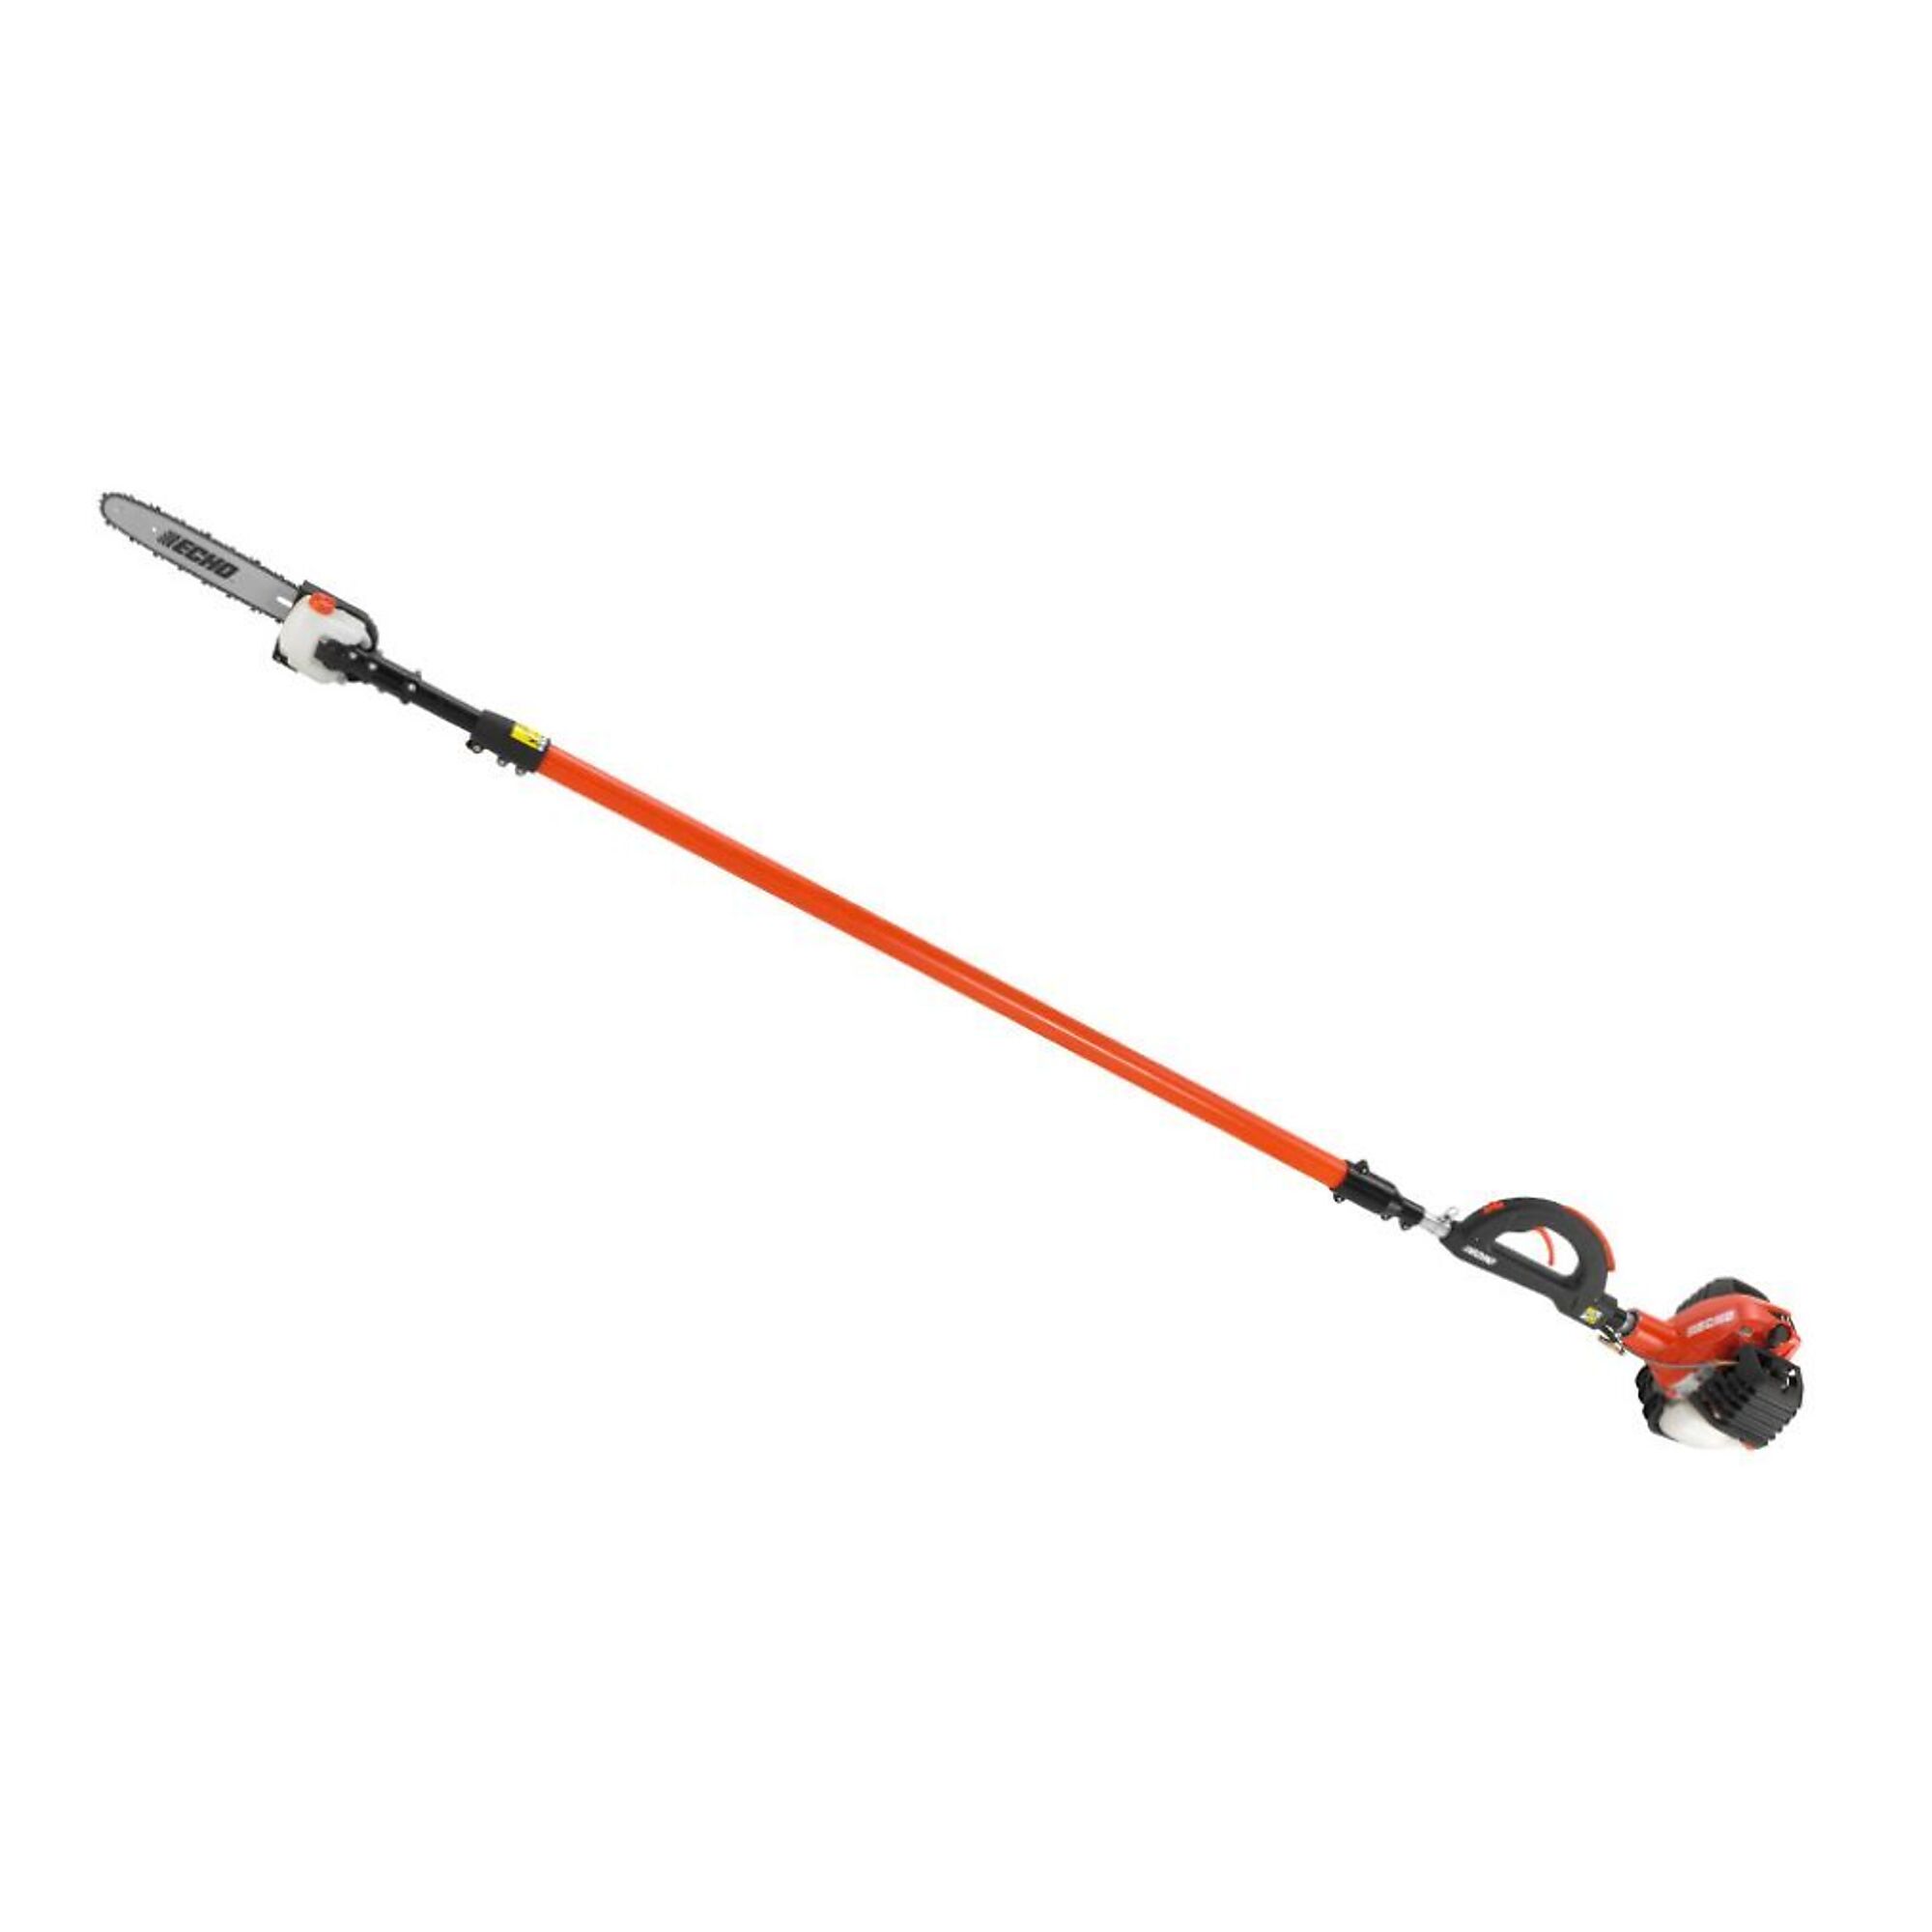 ECHO X Series, Gas-Powered Telescoping Power Pole Saw, Blade Length 12 in, Model PPT-2620